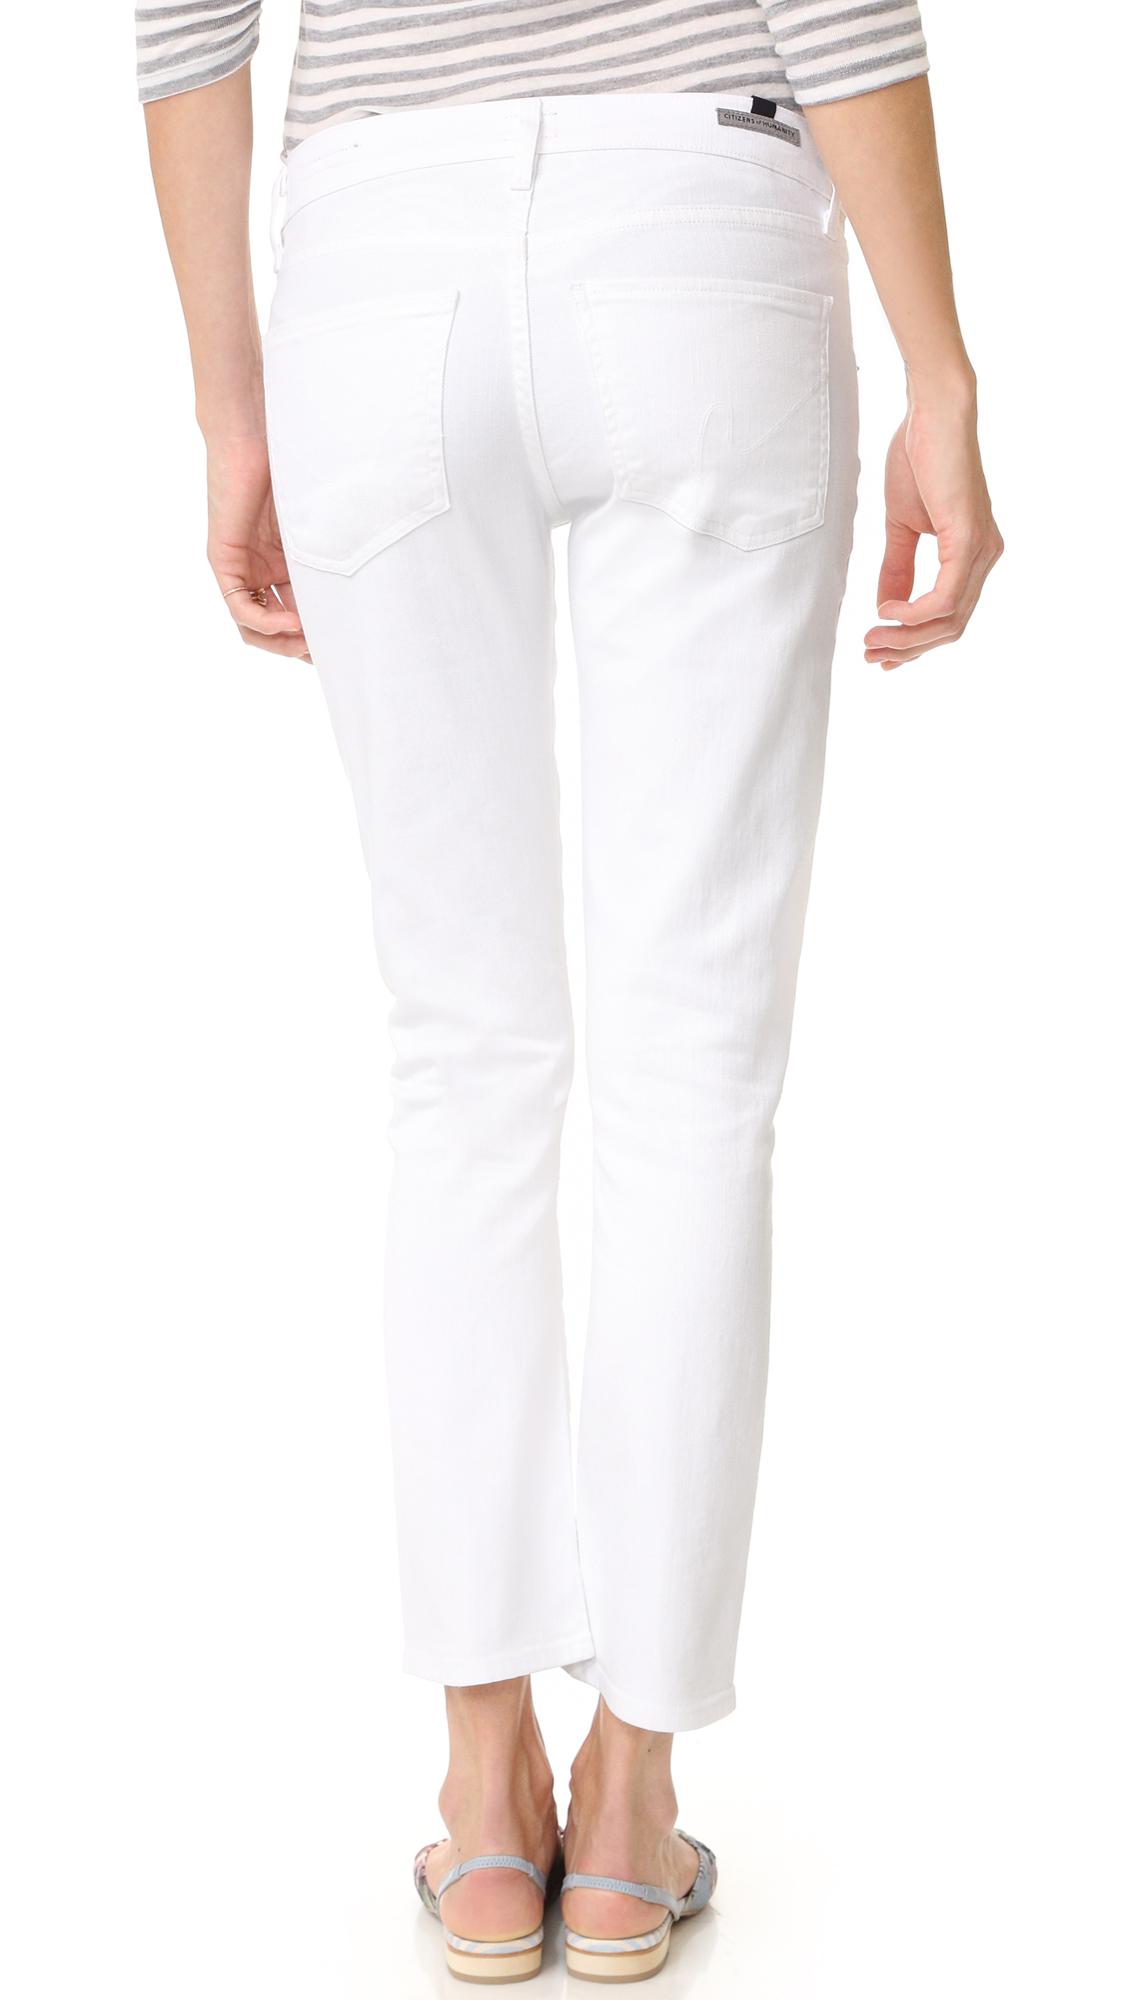 Citizens of Humanity Phoebe Maternity Jeans in White - Lyst